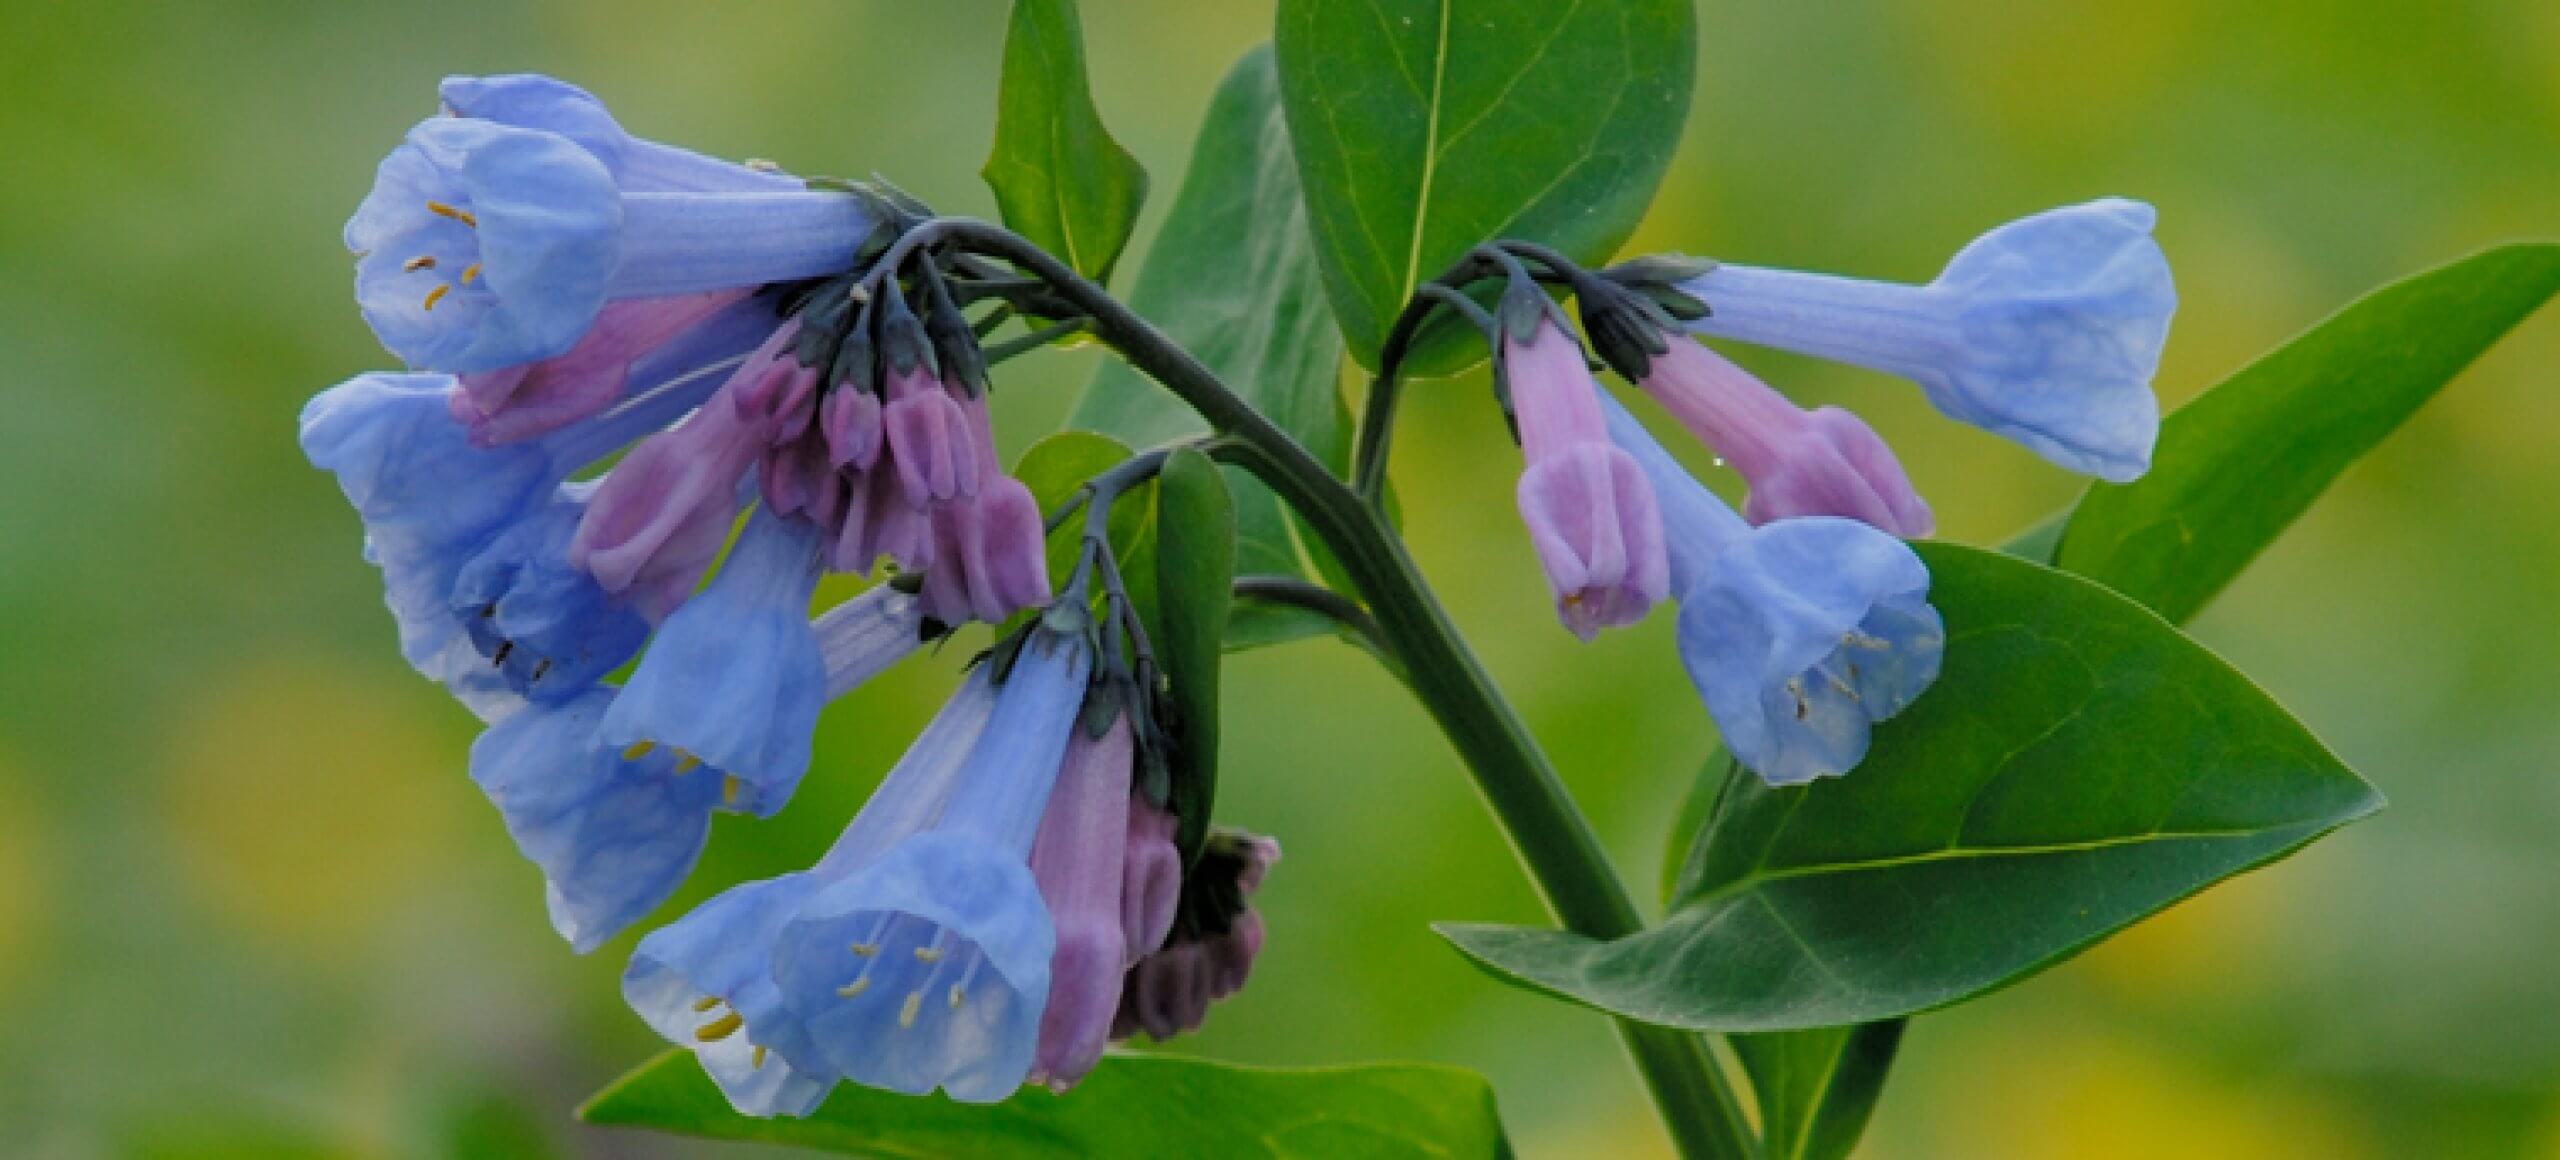 Closeup of Virginia Bluebells blooming against a green background.